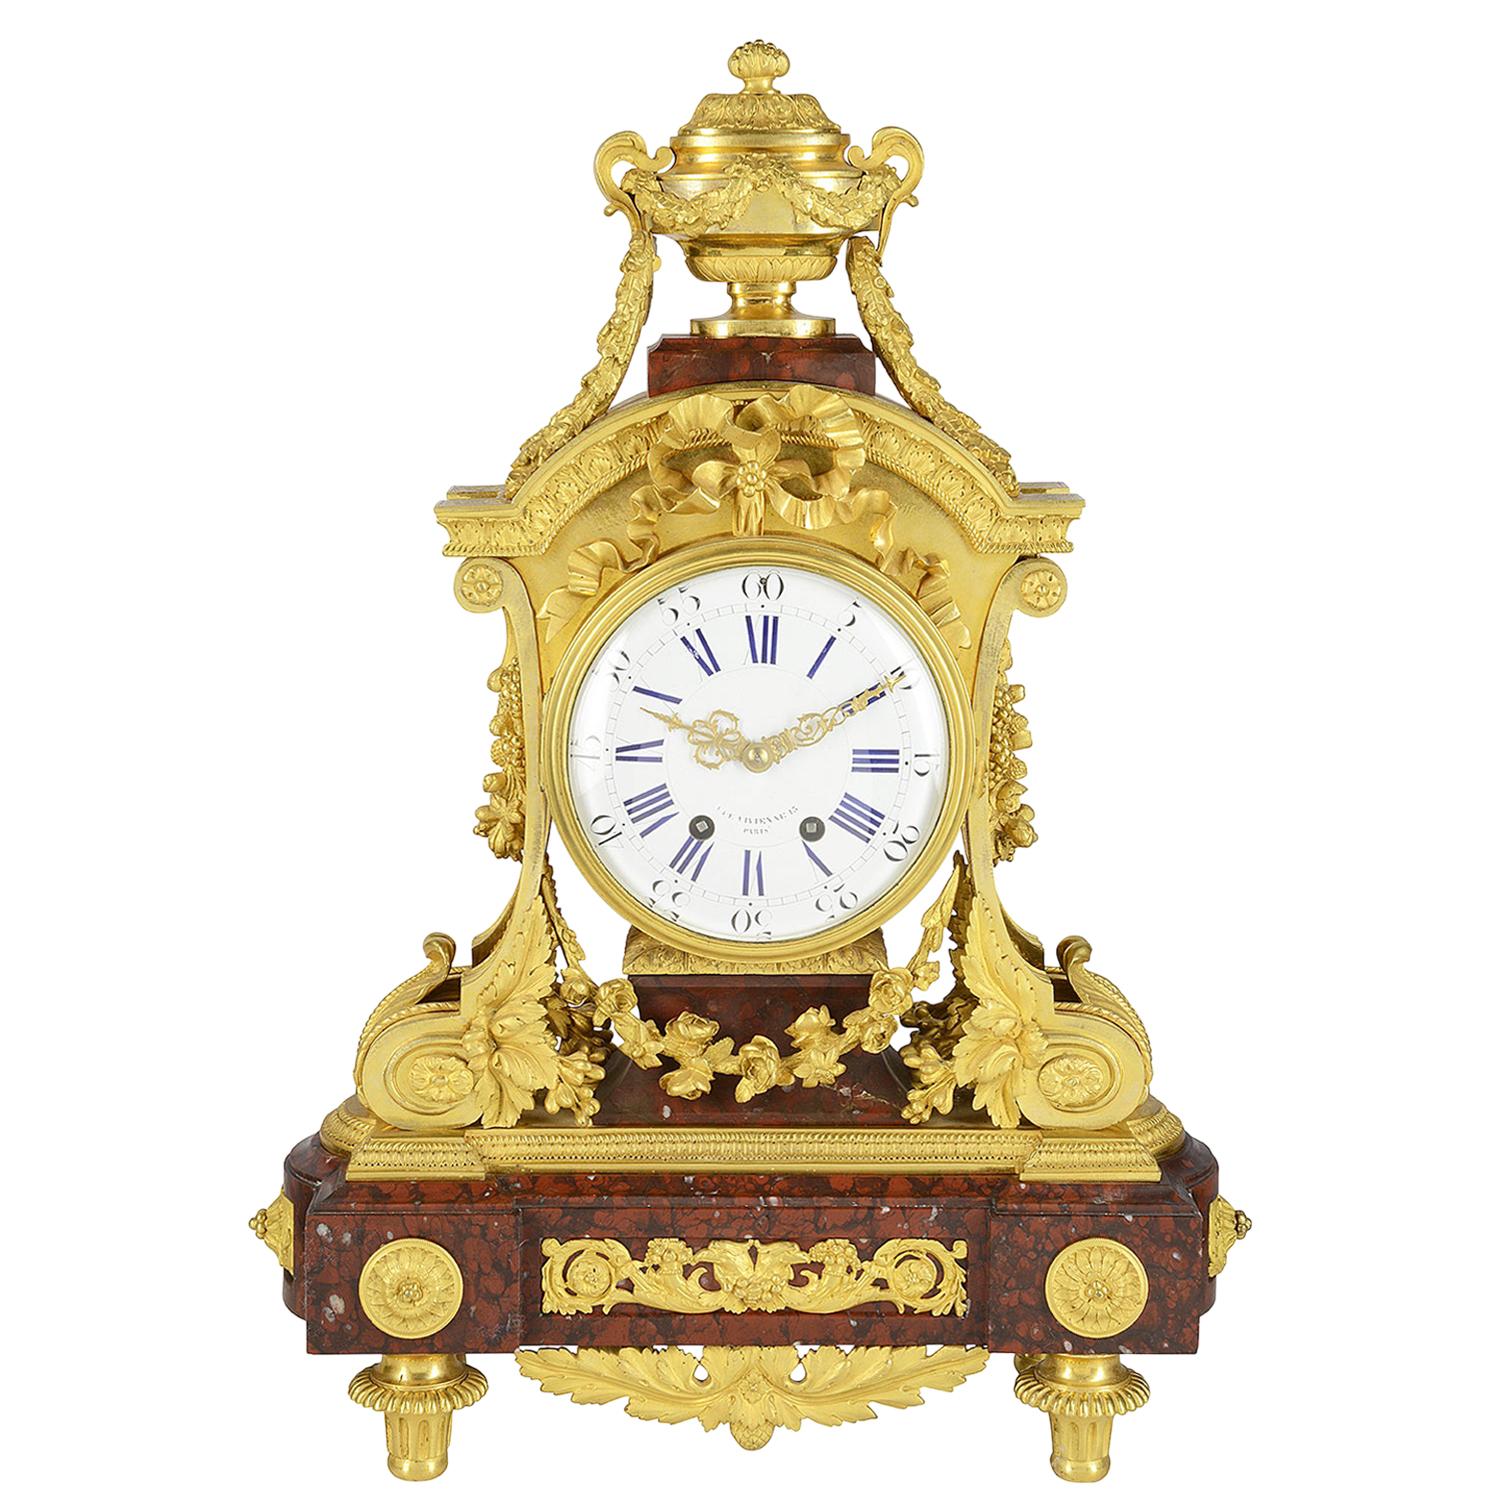 Fine Quality 19th Century French Gilded Mantel Clock